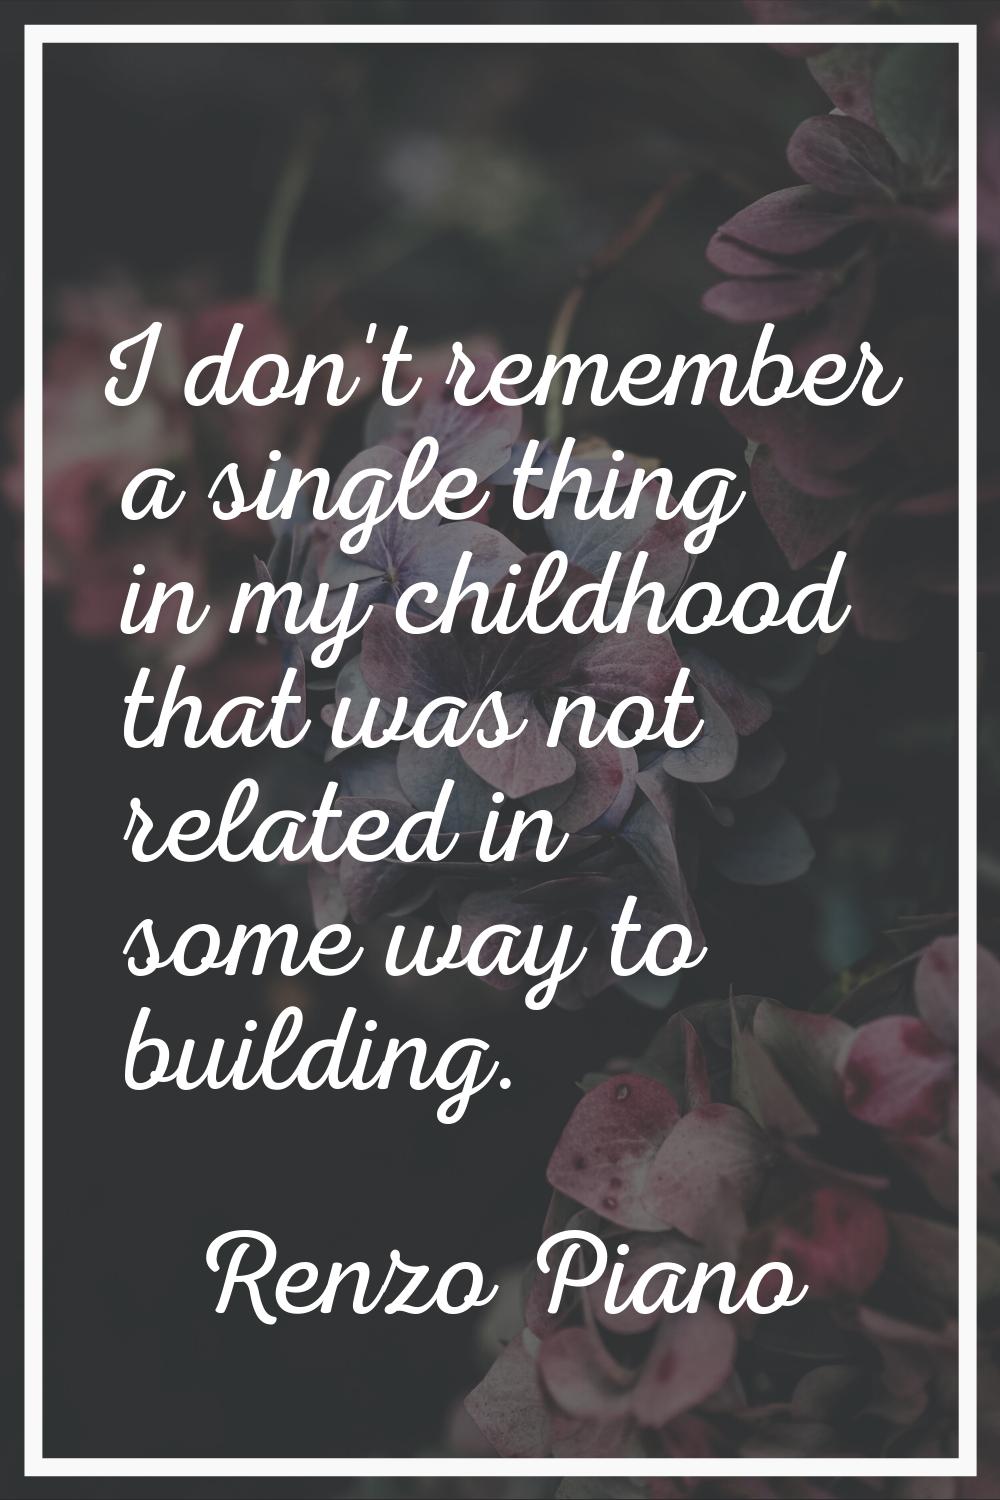 I don't remember a single thing in my childhood that was not related in some way to building.